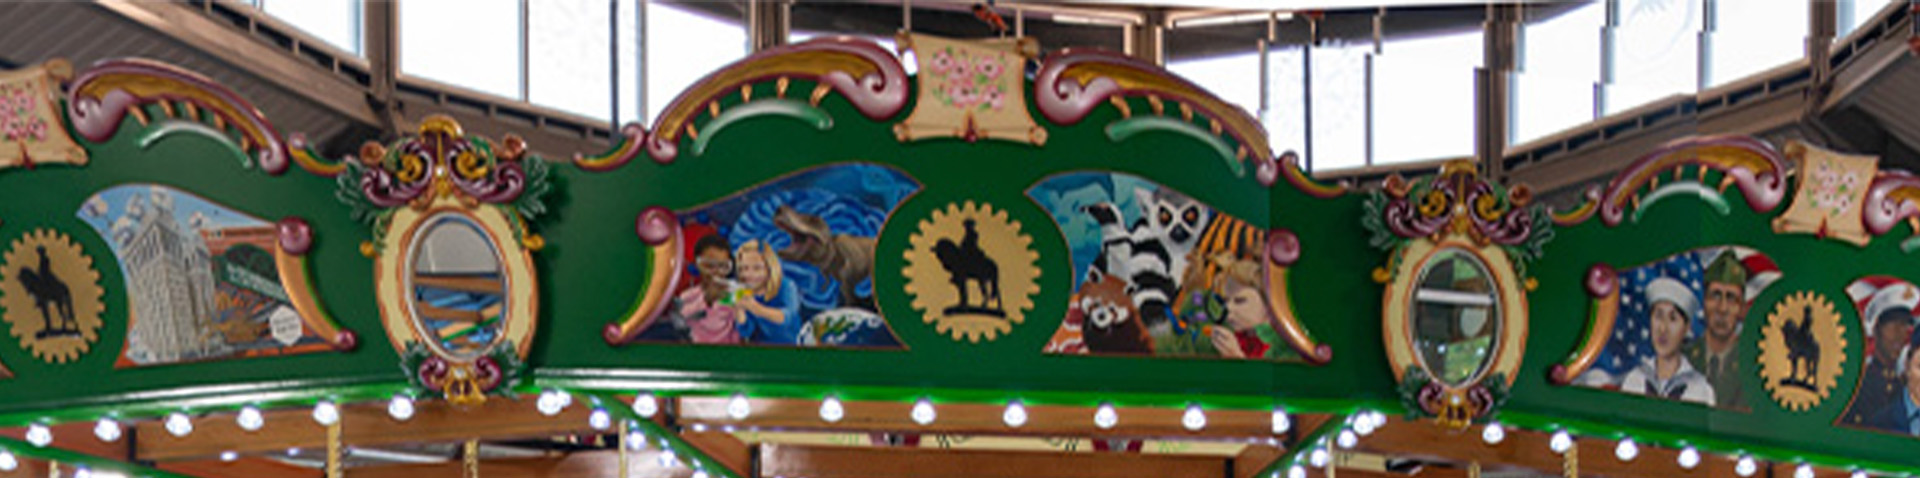 art work and details at the top of the carousel